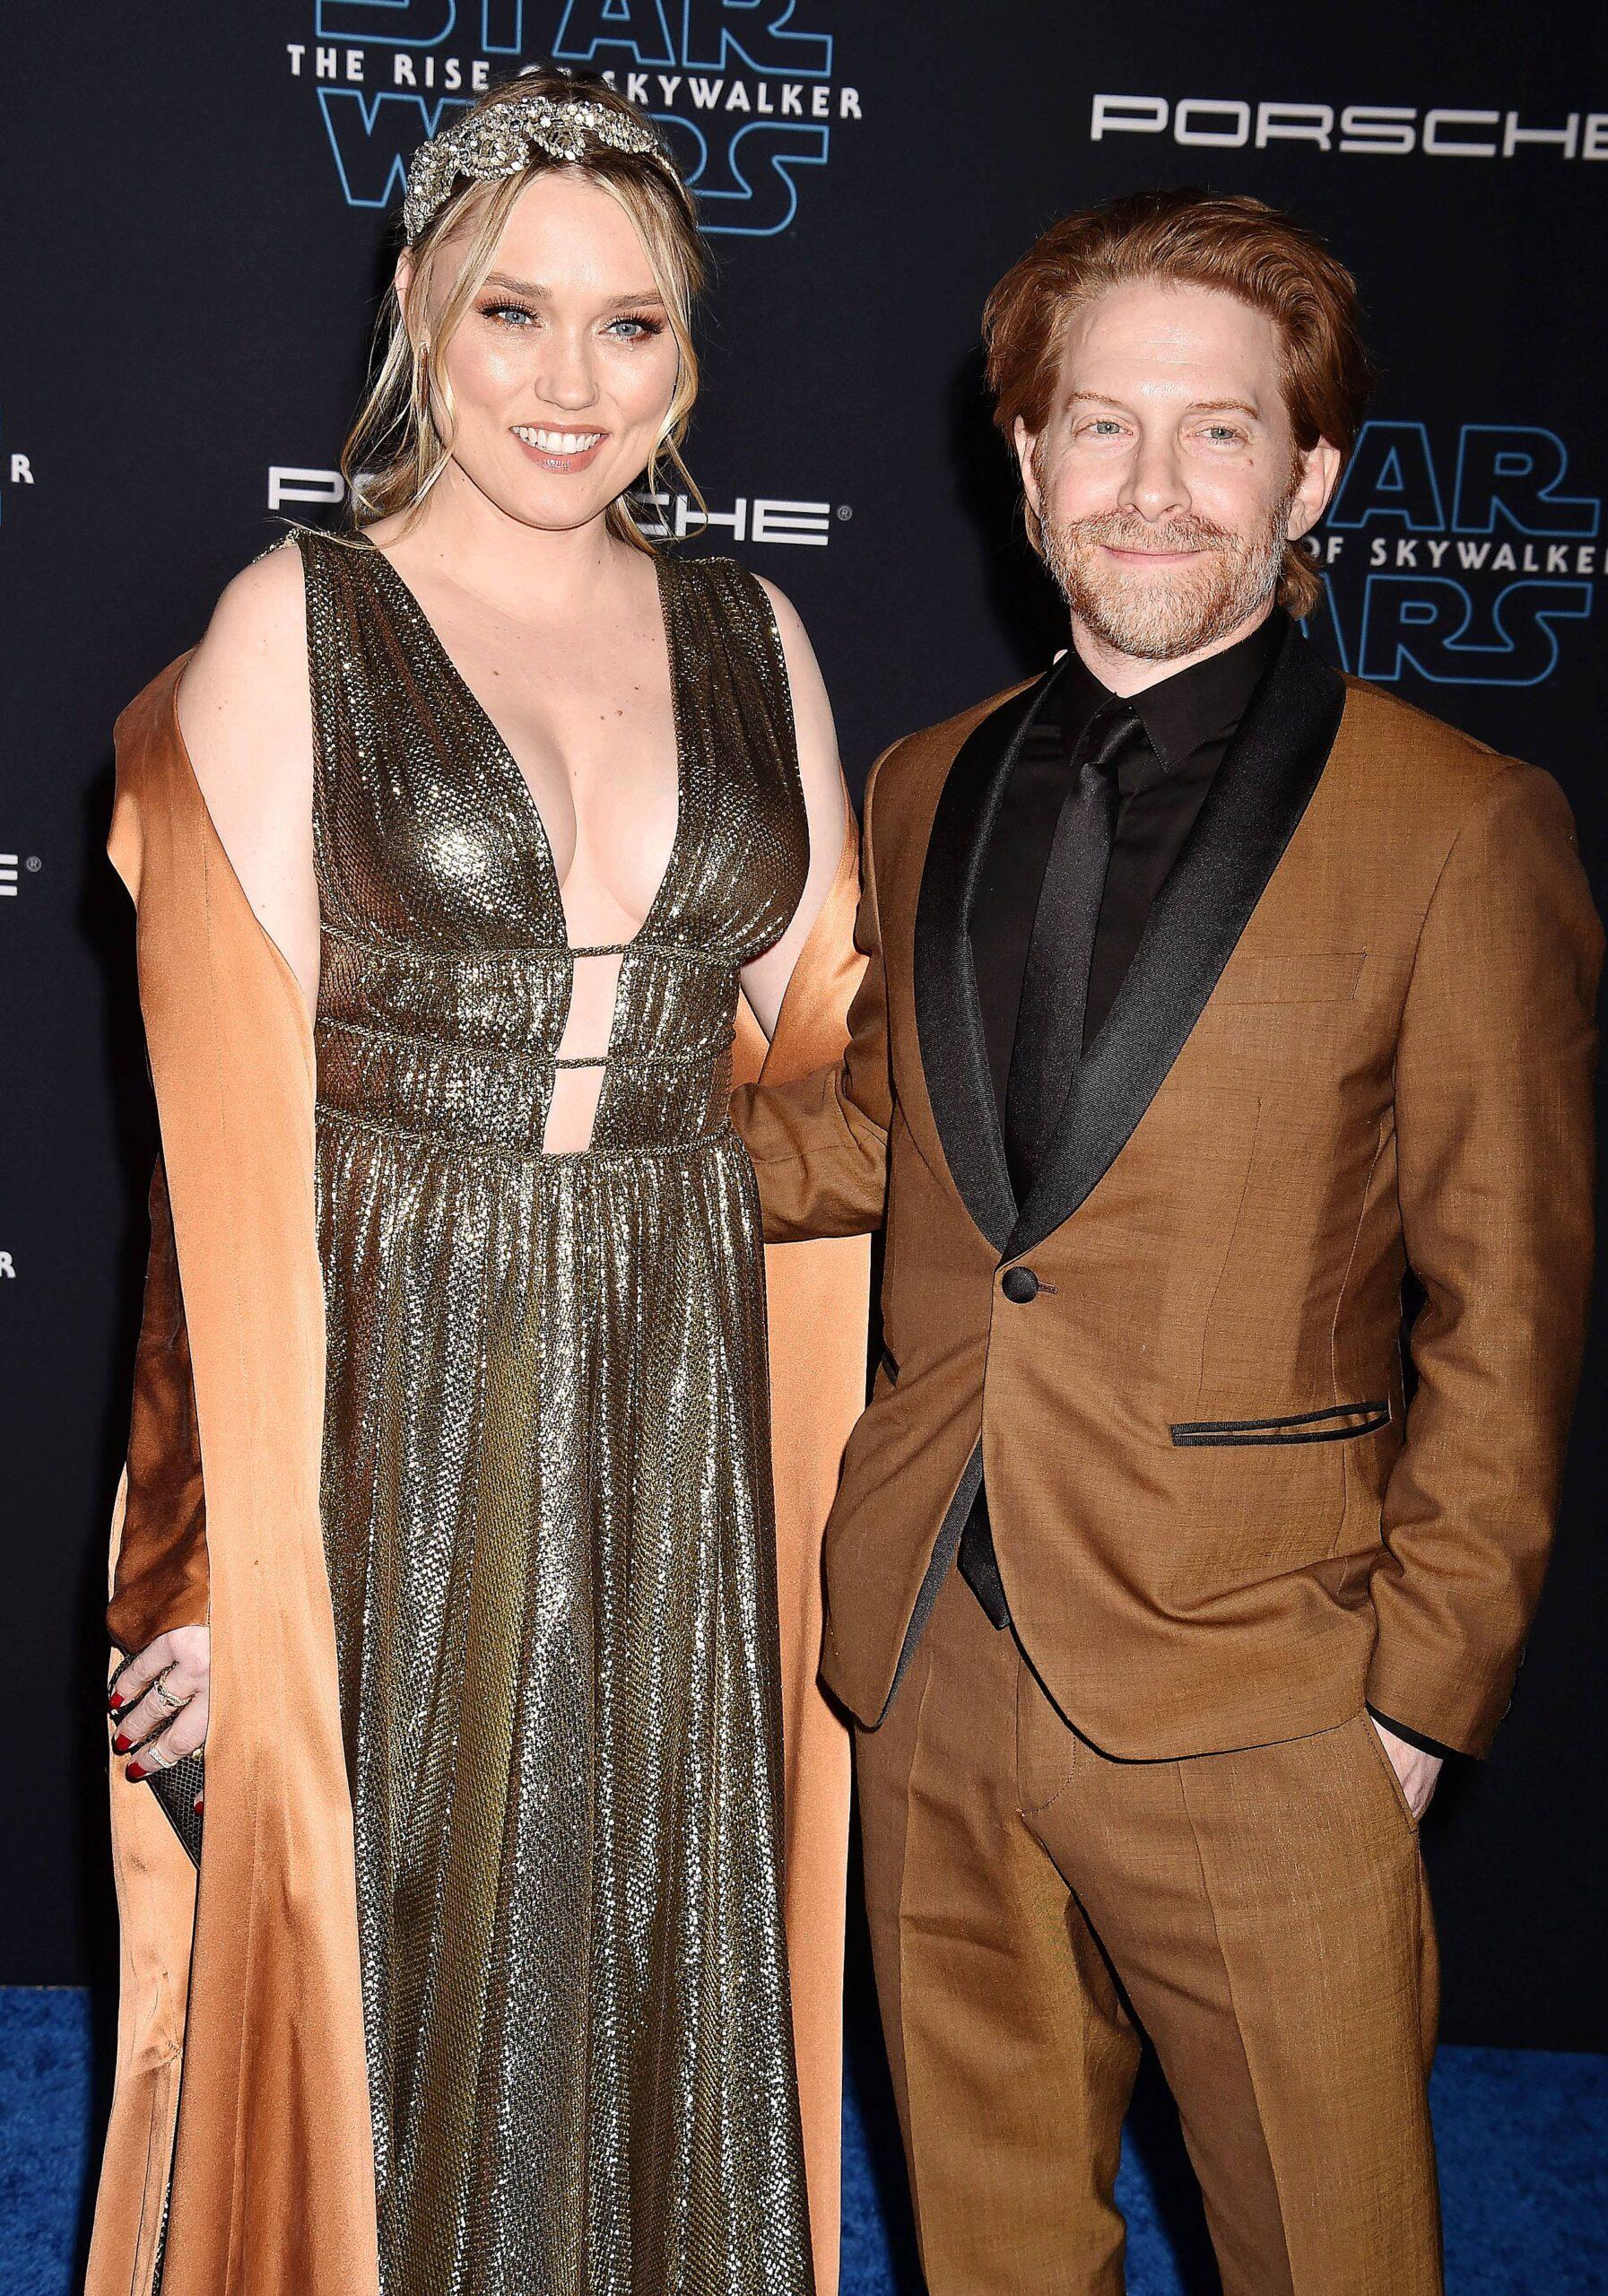 Seth Green & Wife Clare Grant Premiere Of Disney's "Star Wars: The Rise Of Skywalker"